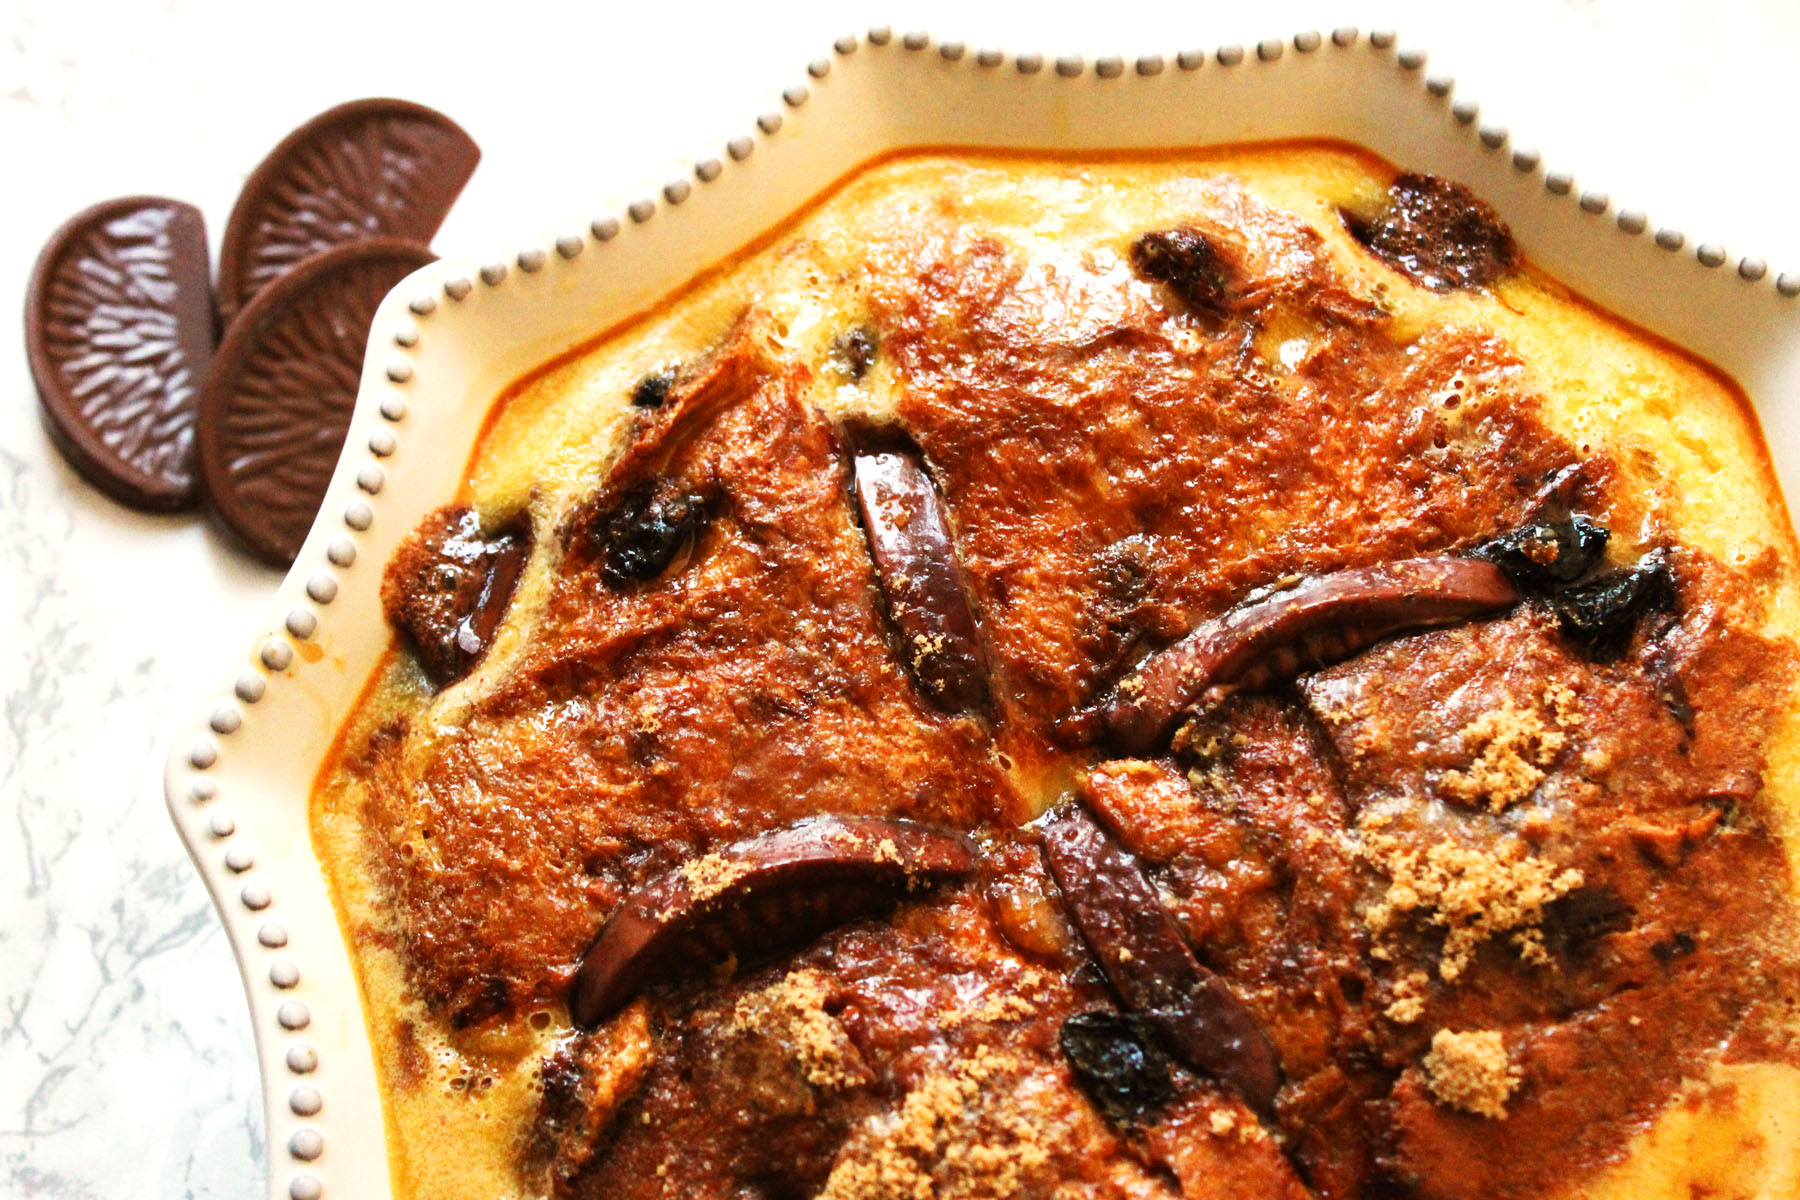 Terry’s Chocolate Orange Bread and Butter Pudding